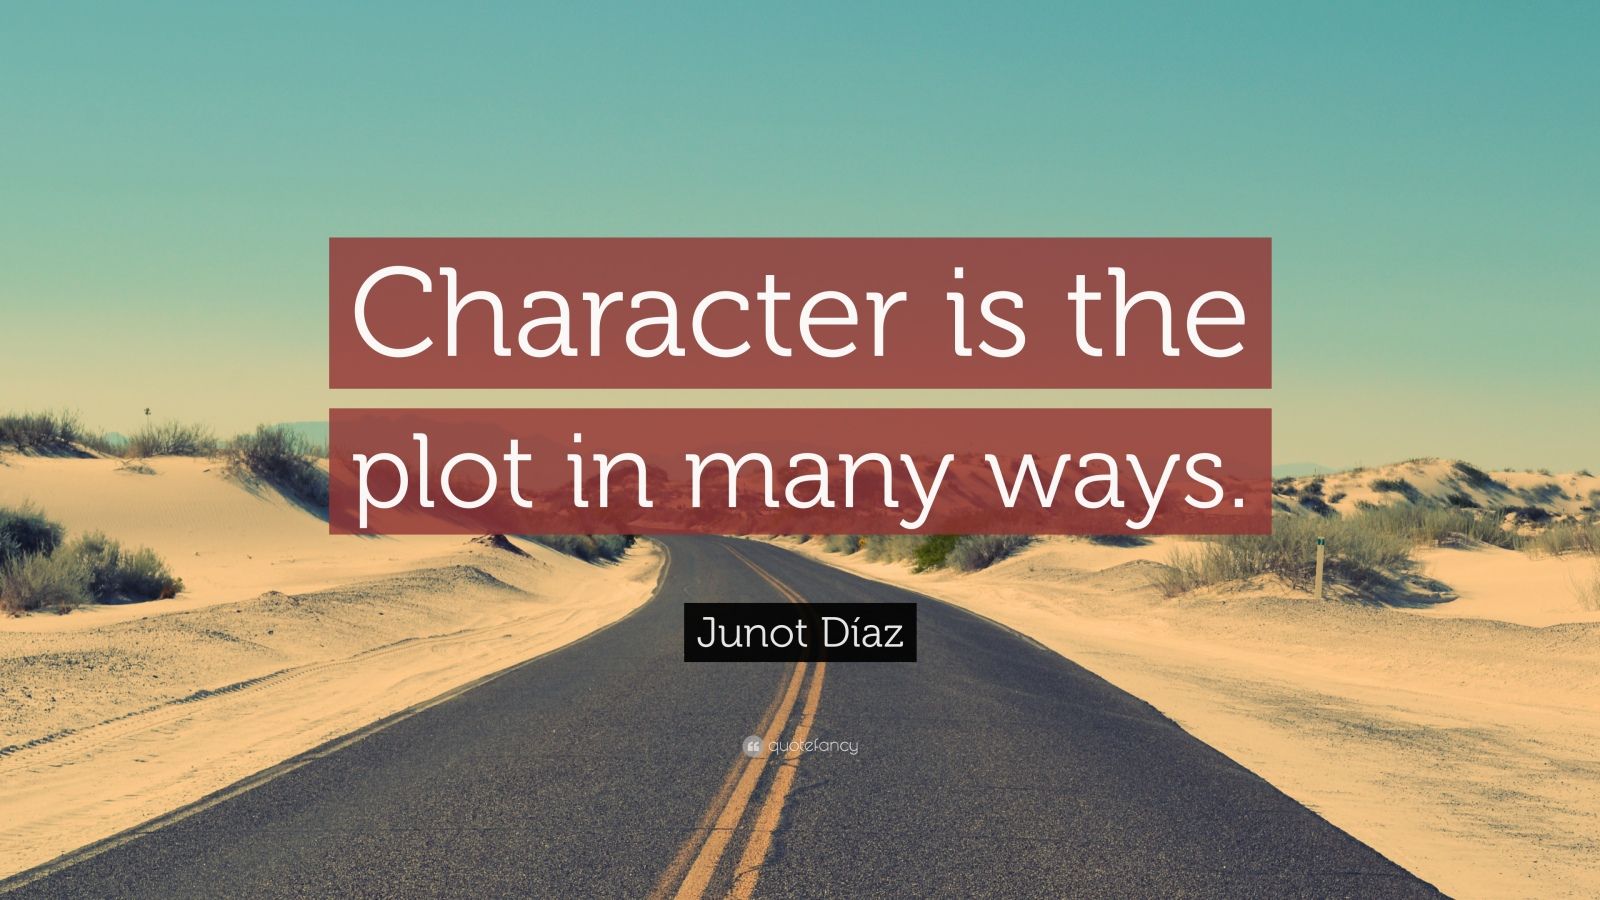 Junot Díaz Quote: “Character is the plot in many ways.” (7 wallpapers) - Quotefancy